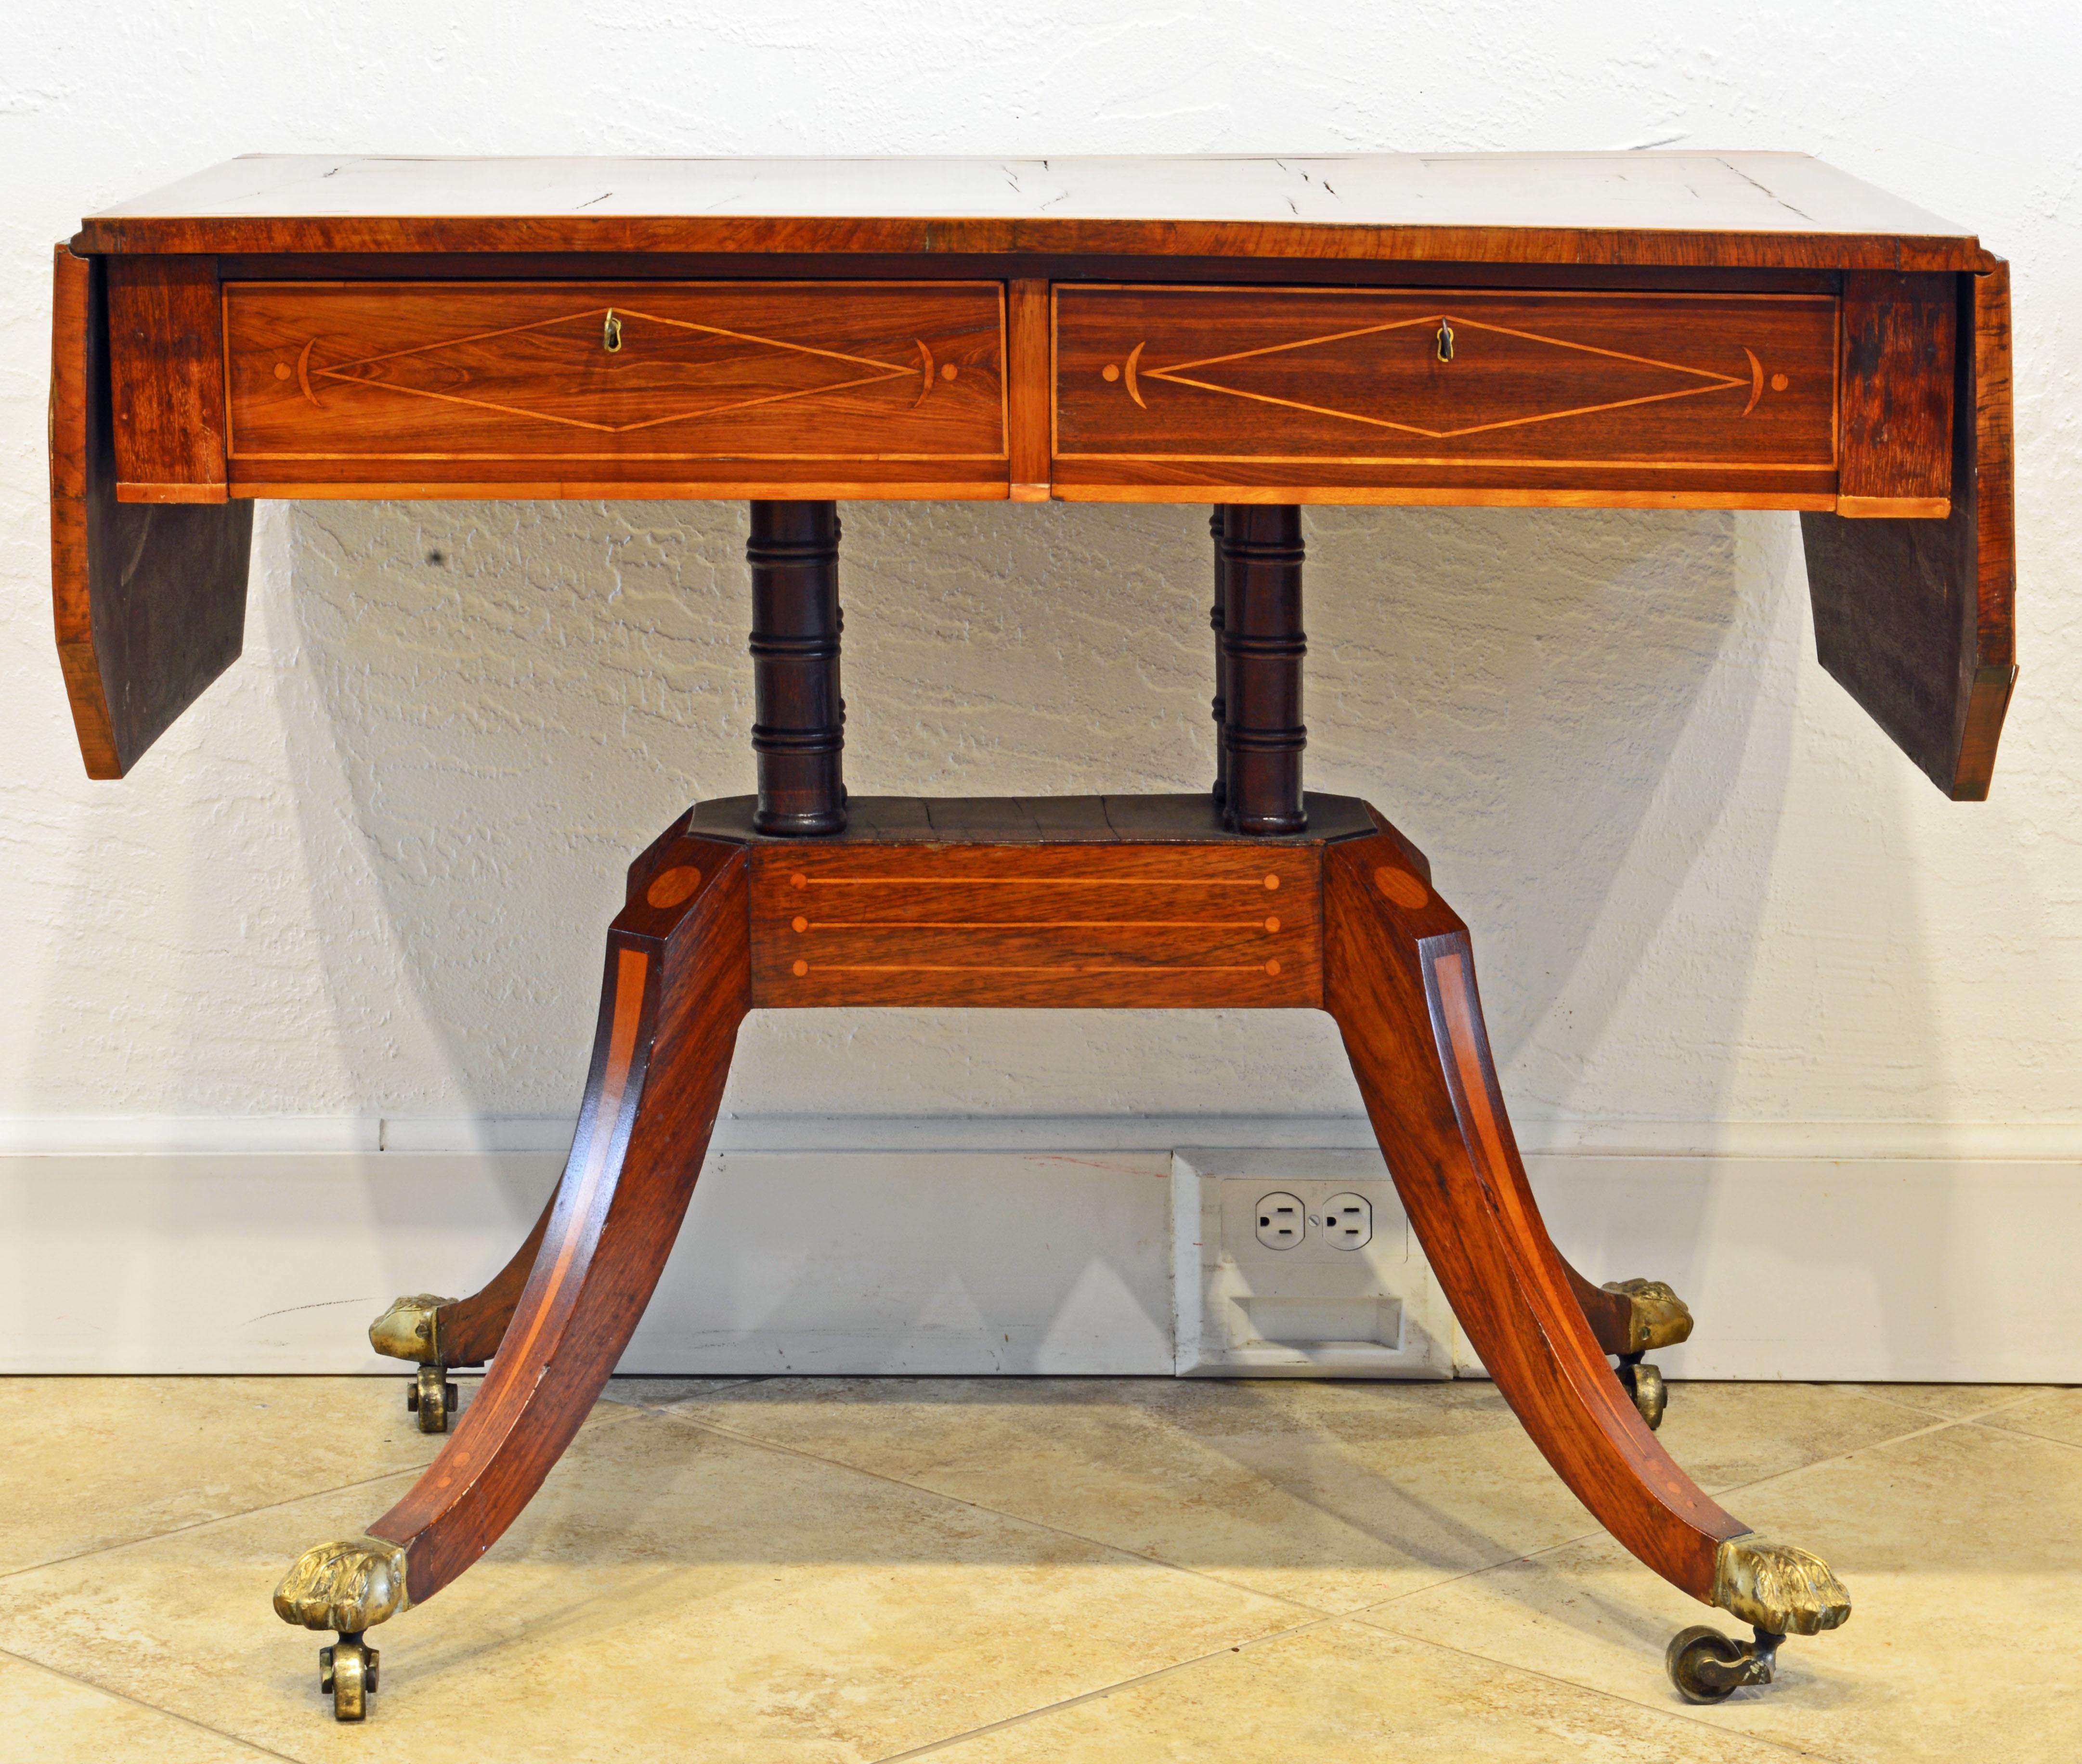 This early regency rosewood sofa table features satinwood inlay with stars, spheres and moons on the banded top, drawer fronts and base. The other side has simulated drawers identical with the front. The table rests on four turned columns connecting